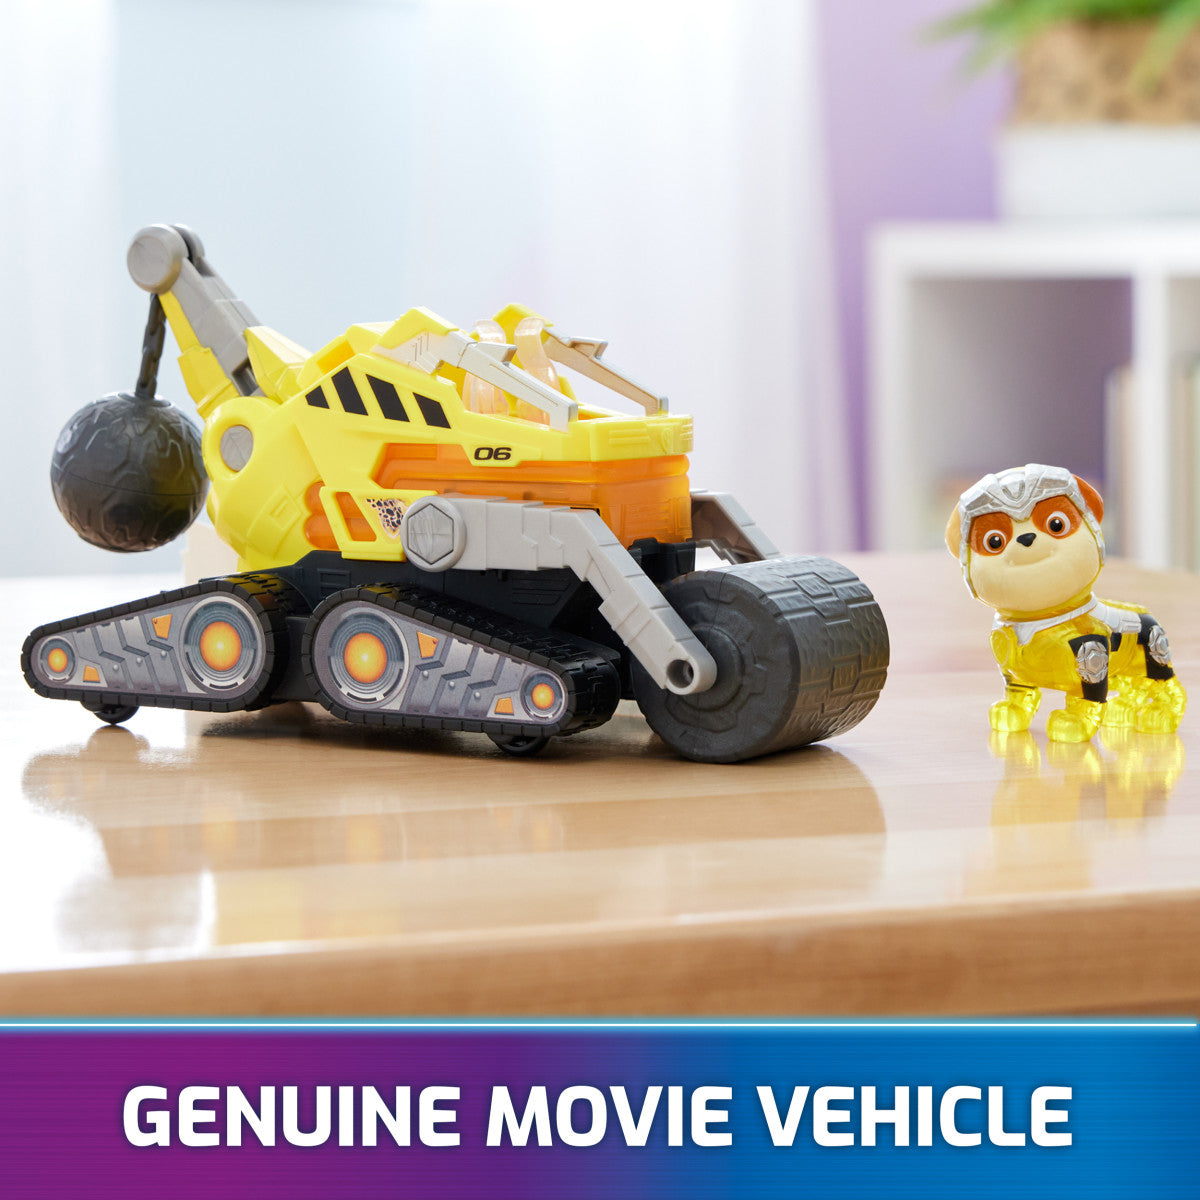 Paw Patrol: The Mighty Movie - Rubble Vehiculo Tematico